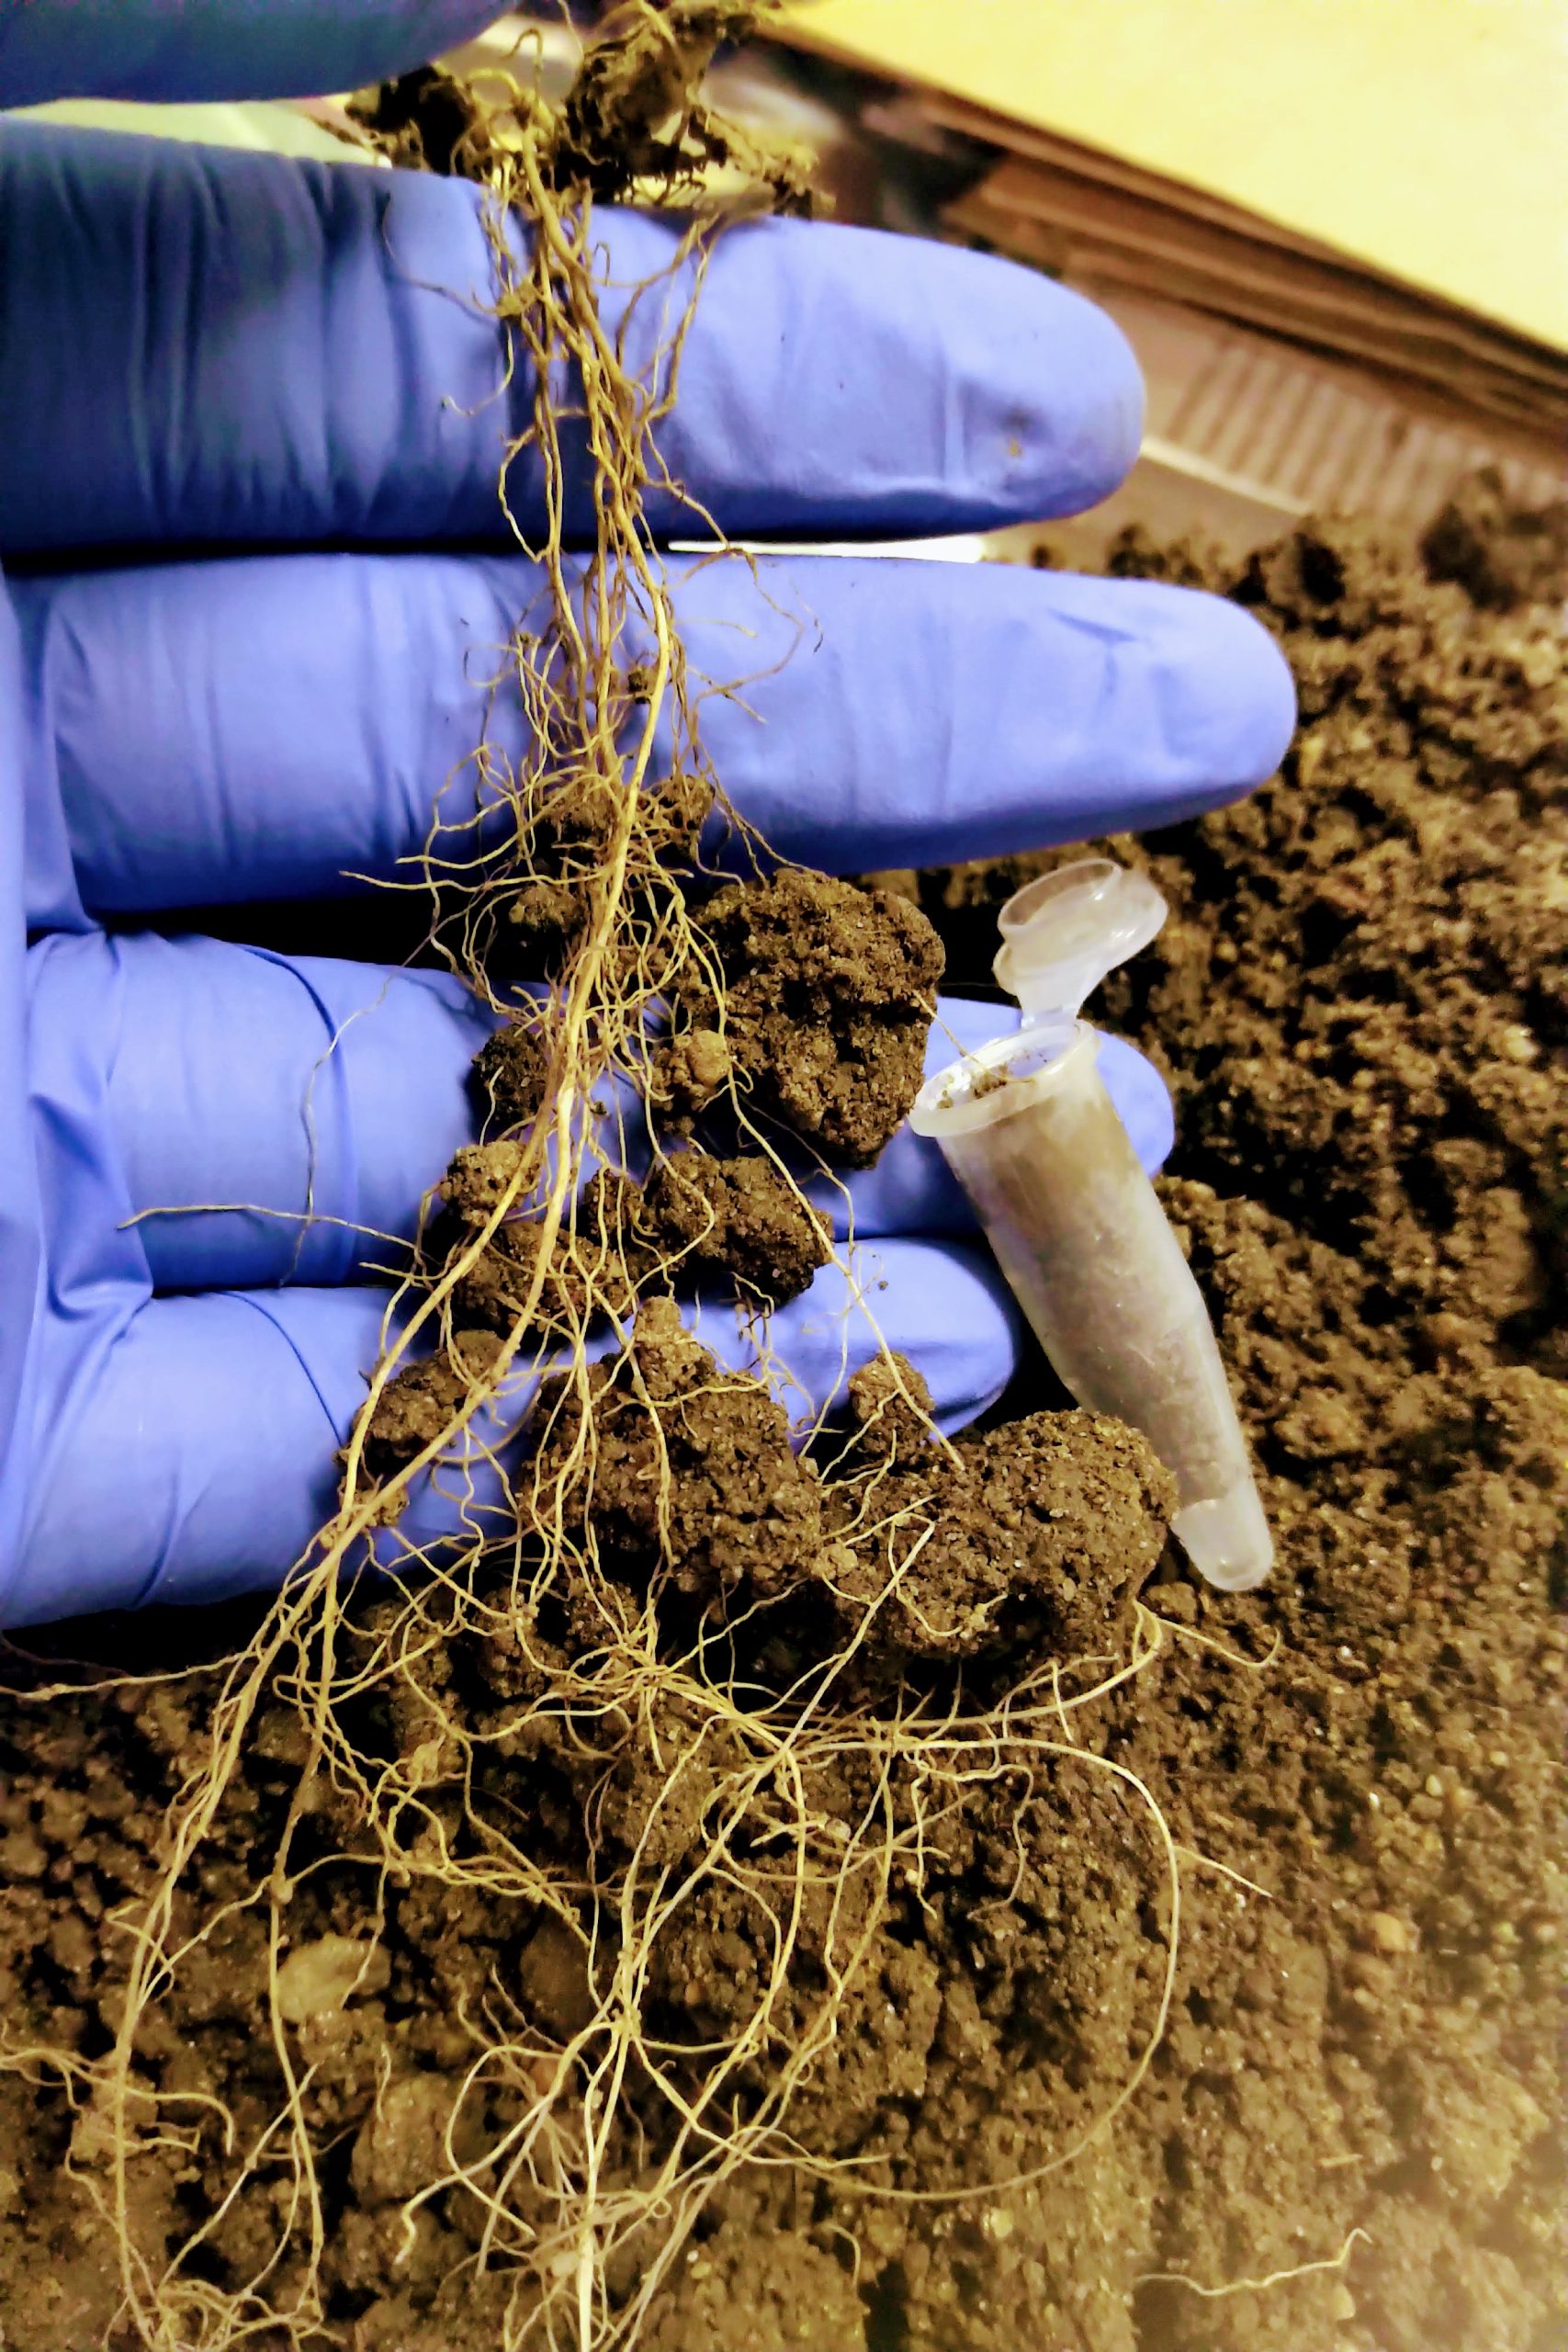 a hand wearing a blue glove holds up a section of plant roots coated in chunks of brown soil